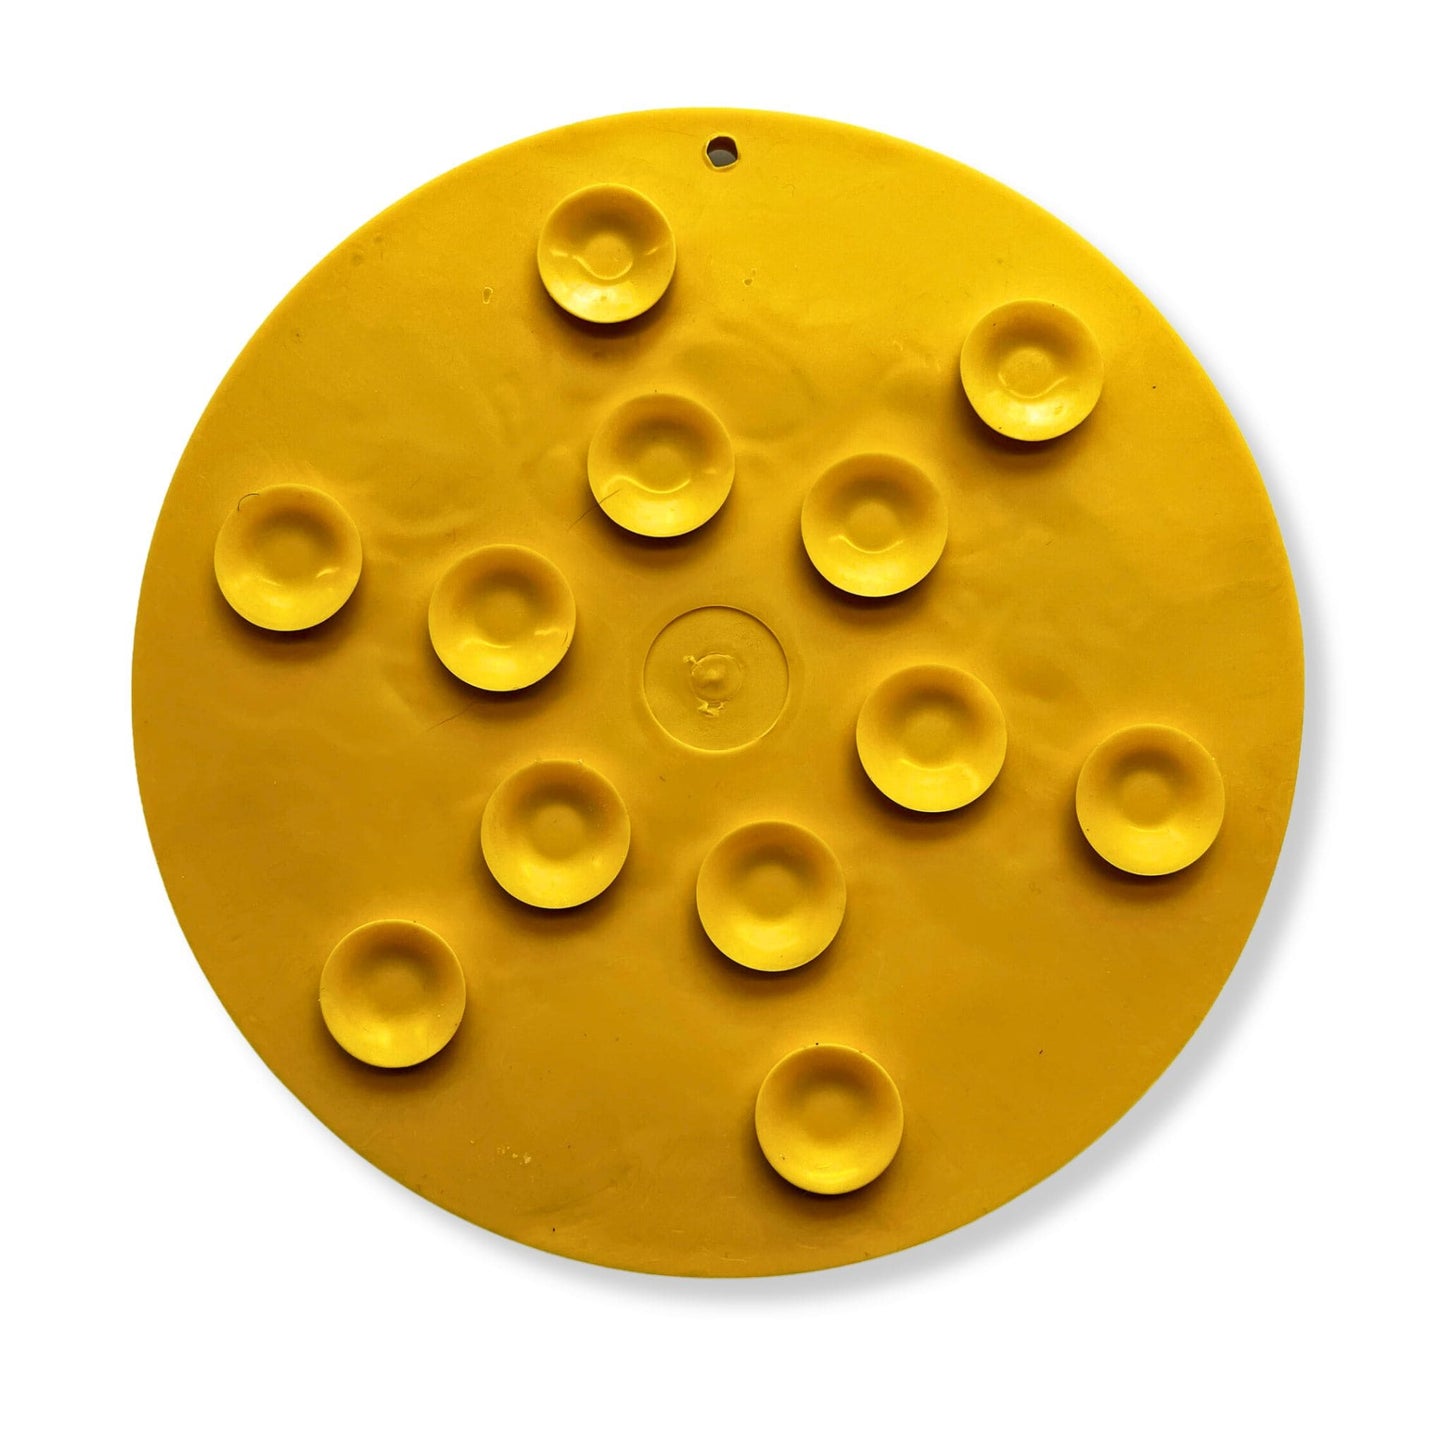 Yellow rubber duck design enrichment lick mat with suction cups on the backside for sticking it to the wall